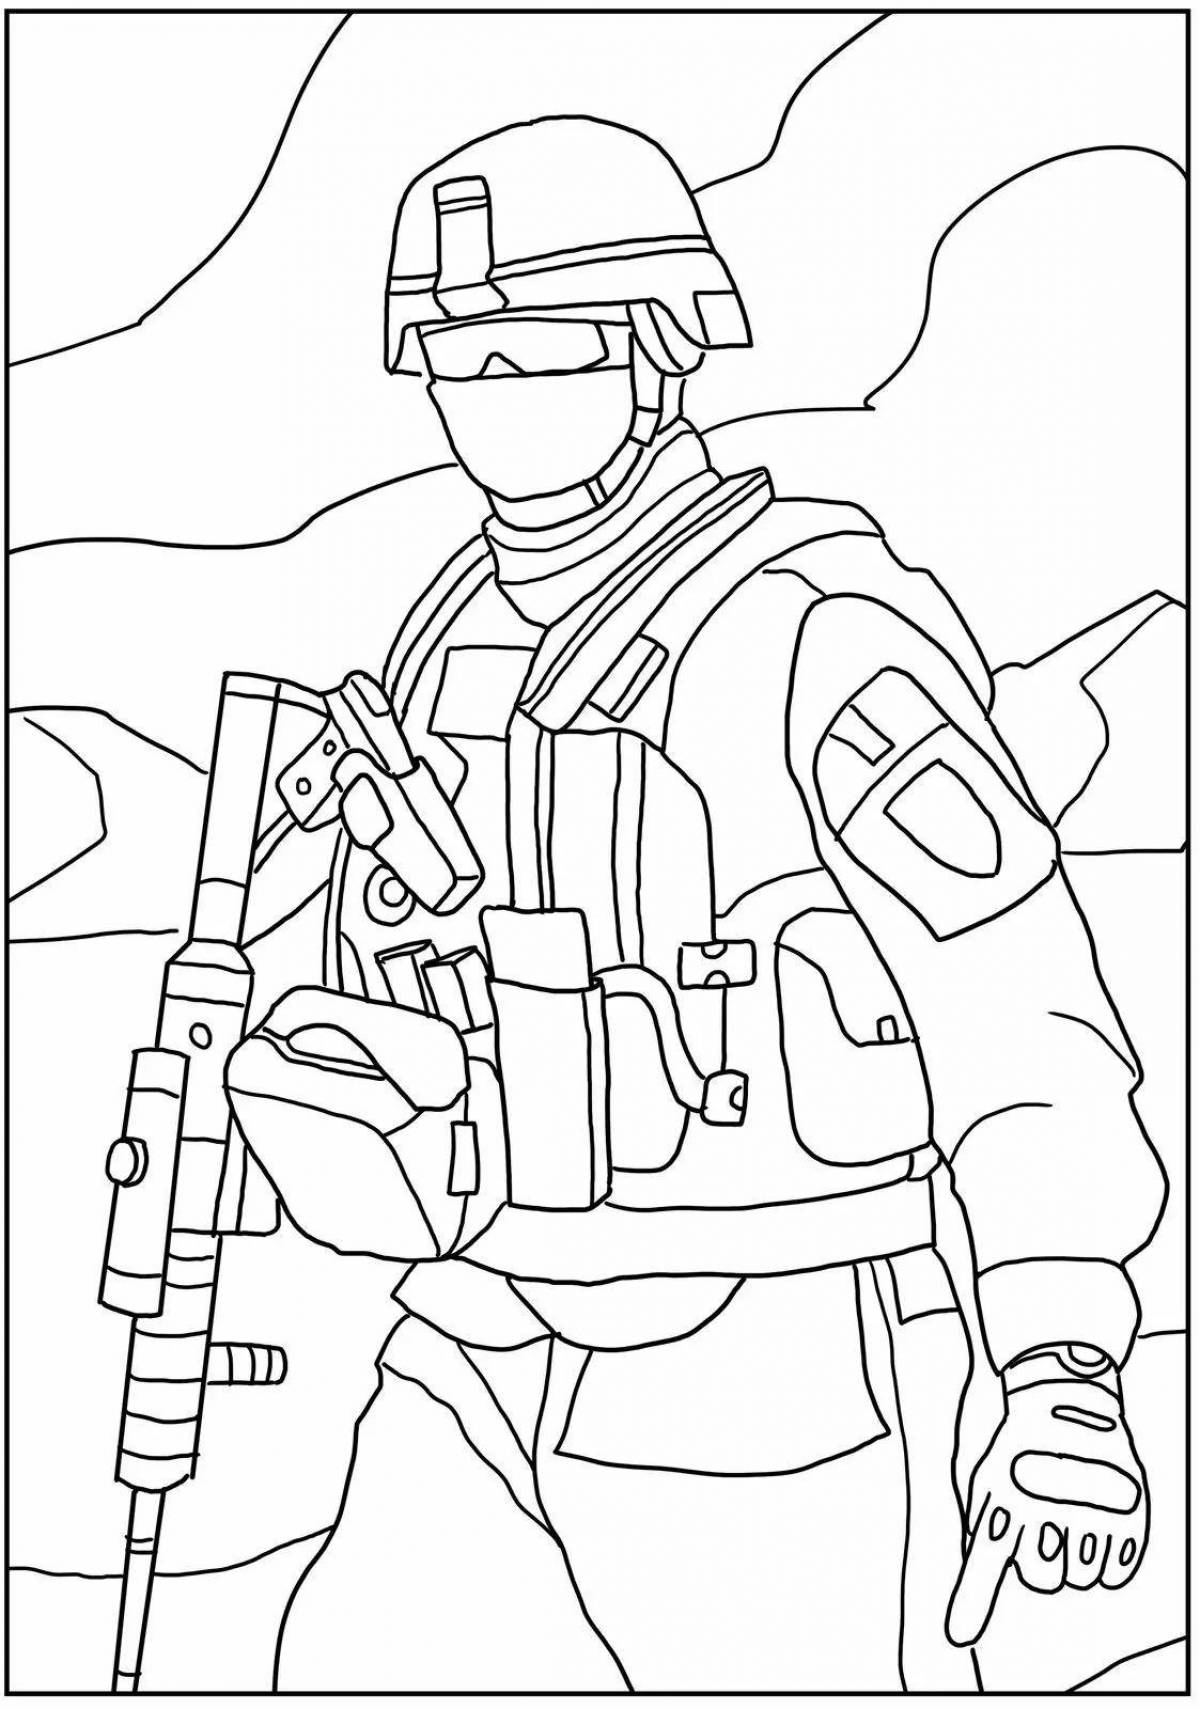 Great Russian special forces coloring page